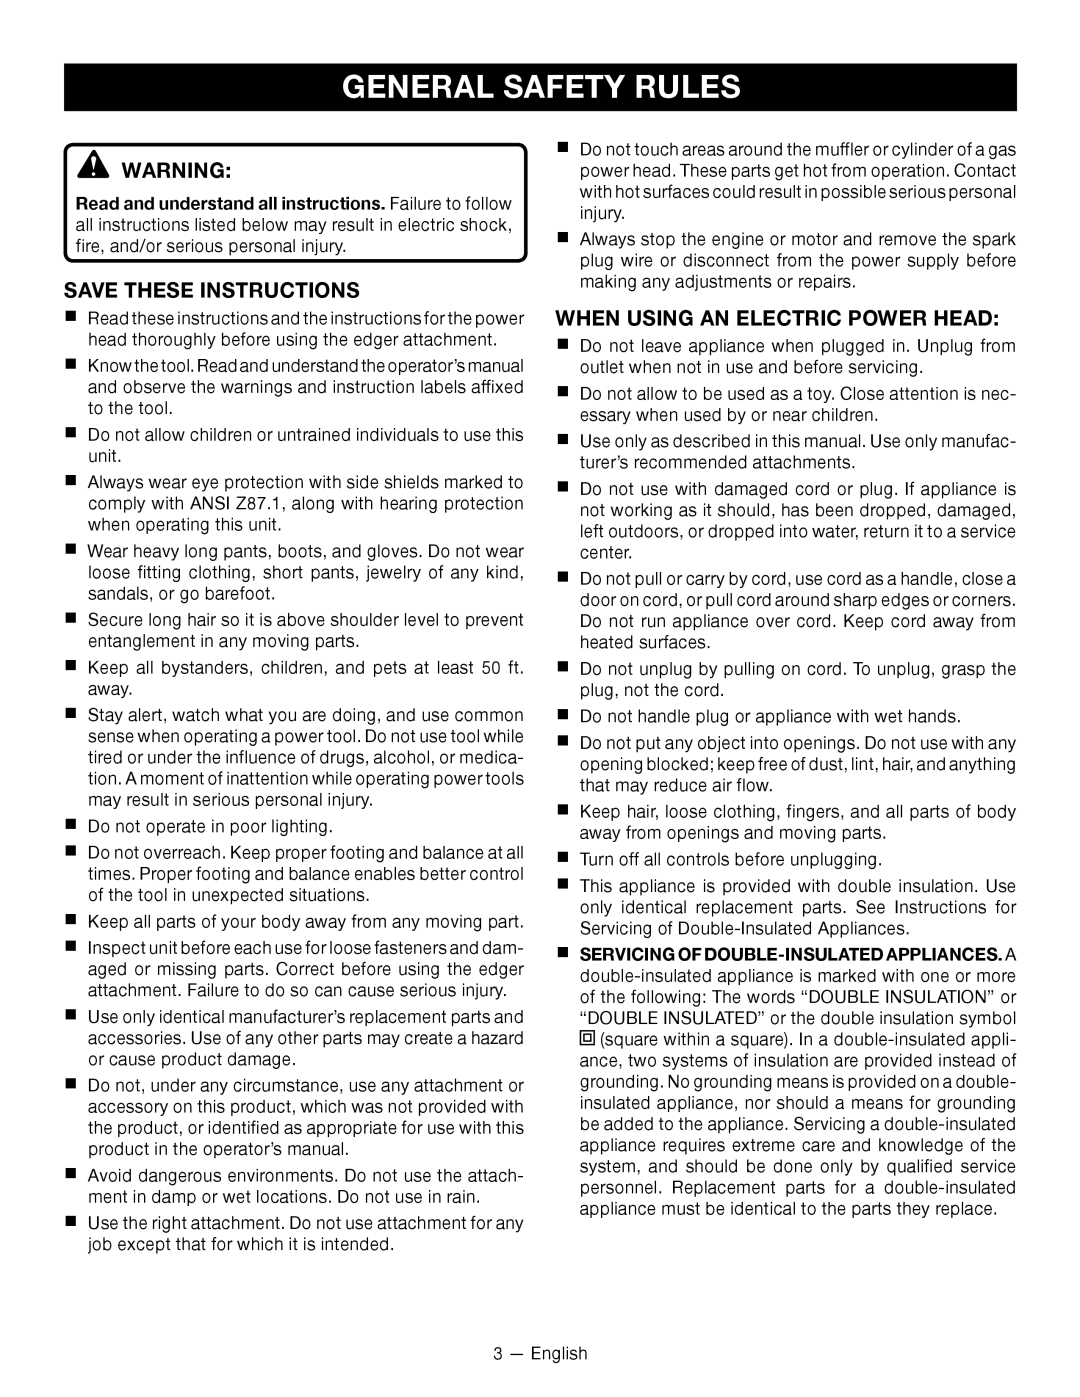 Ryobi RY15518 manuel dutilisation General Safety Rules, Save These Instructions, When Using An Electric Power Head 